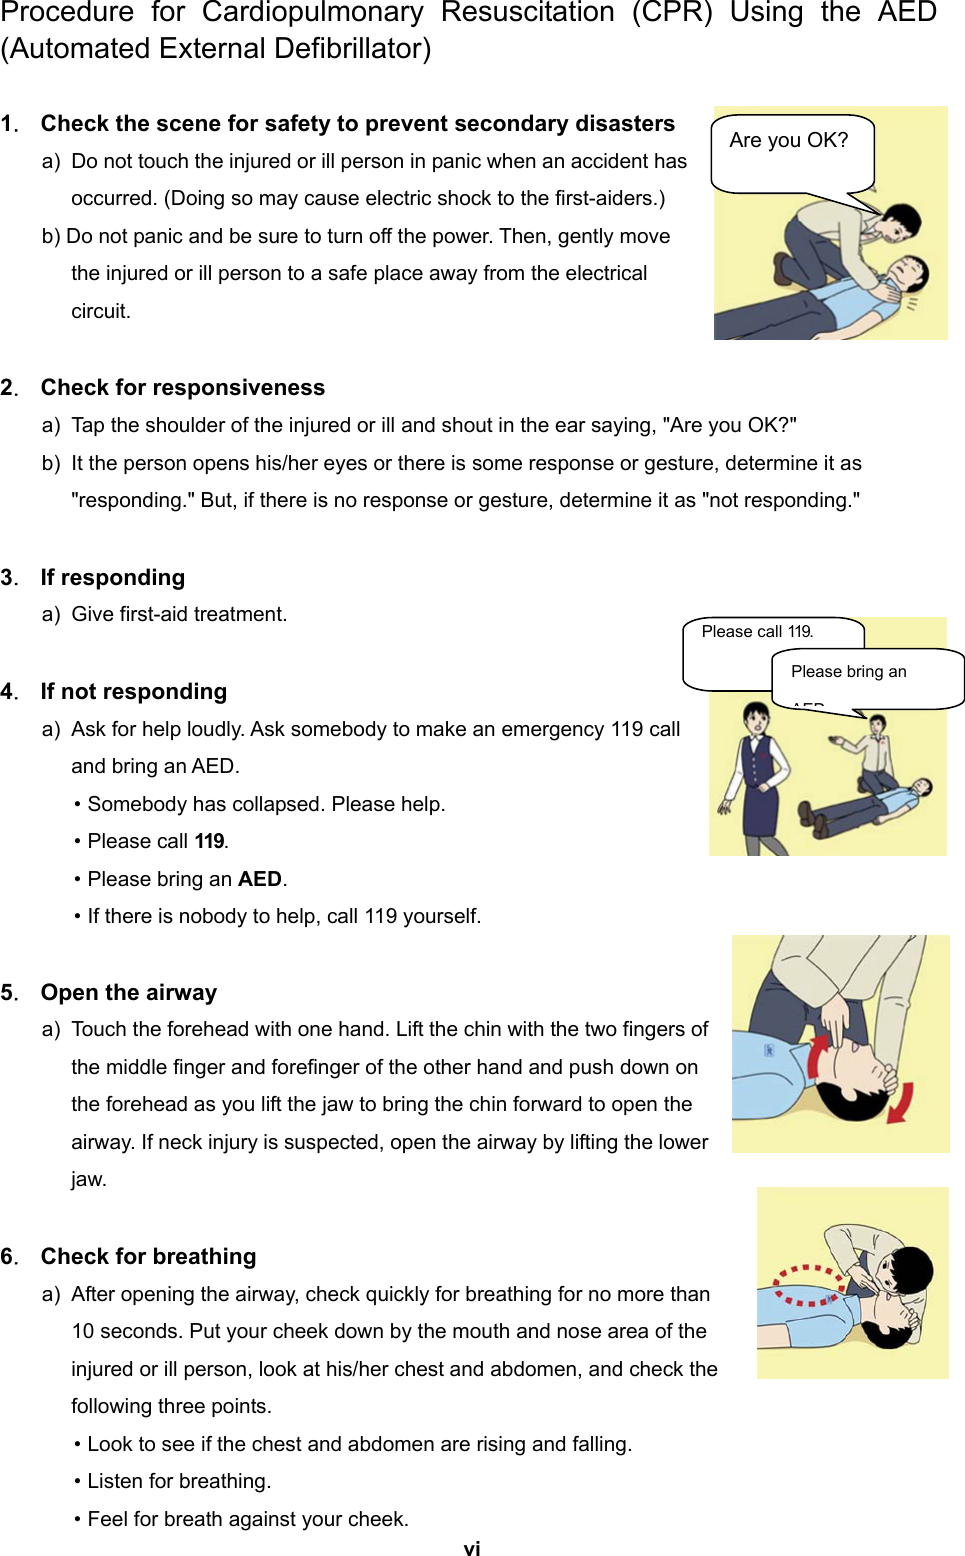  vi  Procedure for Cardiopulmonary Resuscitation (CPR) Using the AED (Automated External Defibrillator)  1．  Check the scene for safety to prevent secondary disasters a)  Do not touch the injured or ill person in panic when an accident has occurred. (Doing so may cause electric shock to the first-aiders.) b) Do not panic and be sure to turn off the power. Then, gently move the injured or ill person to a safe place away from the electrical circuit.  2．  Check for responsiveness a)  Tap the shoulder of the injured or ill and shout in the ear saying, &quot;Are you OK?&quot; b)  It the person opens his/her eyes or there is some response or gesture, determine it as &quot;responding.&quot; But, if there is no response or gesture, determine it as &quot;not responding.&quot;  3． If responding a)  Give first-aid treatment.  4．  If not responding a)  Ask for help loudly. Ask somebody to make an emergency 119 call and bring an AED. • Somebody has collapsed. Please help. • Please call 119. • Please bring an AED. • If there is nobody to help, call 119 yourself.  5．  Open the airway a)  Touch the forehead with one hand. Lift the chin with the two fingers of the middle finger and forefinger of the other hand and push down on the forehead as you lift the jaw to bring the chin forward to open the airway. If neck injury is suspected, open the airway by lifting the lower jaw.  6．  Check for breathing a)  After opening the airway, check quickly for breathing for no more than 10 seconds. Put your cheek down by the mouth and nose area of the injured or ill person, look at his/her chest and abdomen, and check the following three points. • Look to see if the chest and abdomen are rising and falling. • Listen for breathing. • Feel for breath against your cheek. Are you OK? Please call 119. Please bring an AED